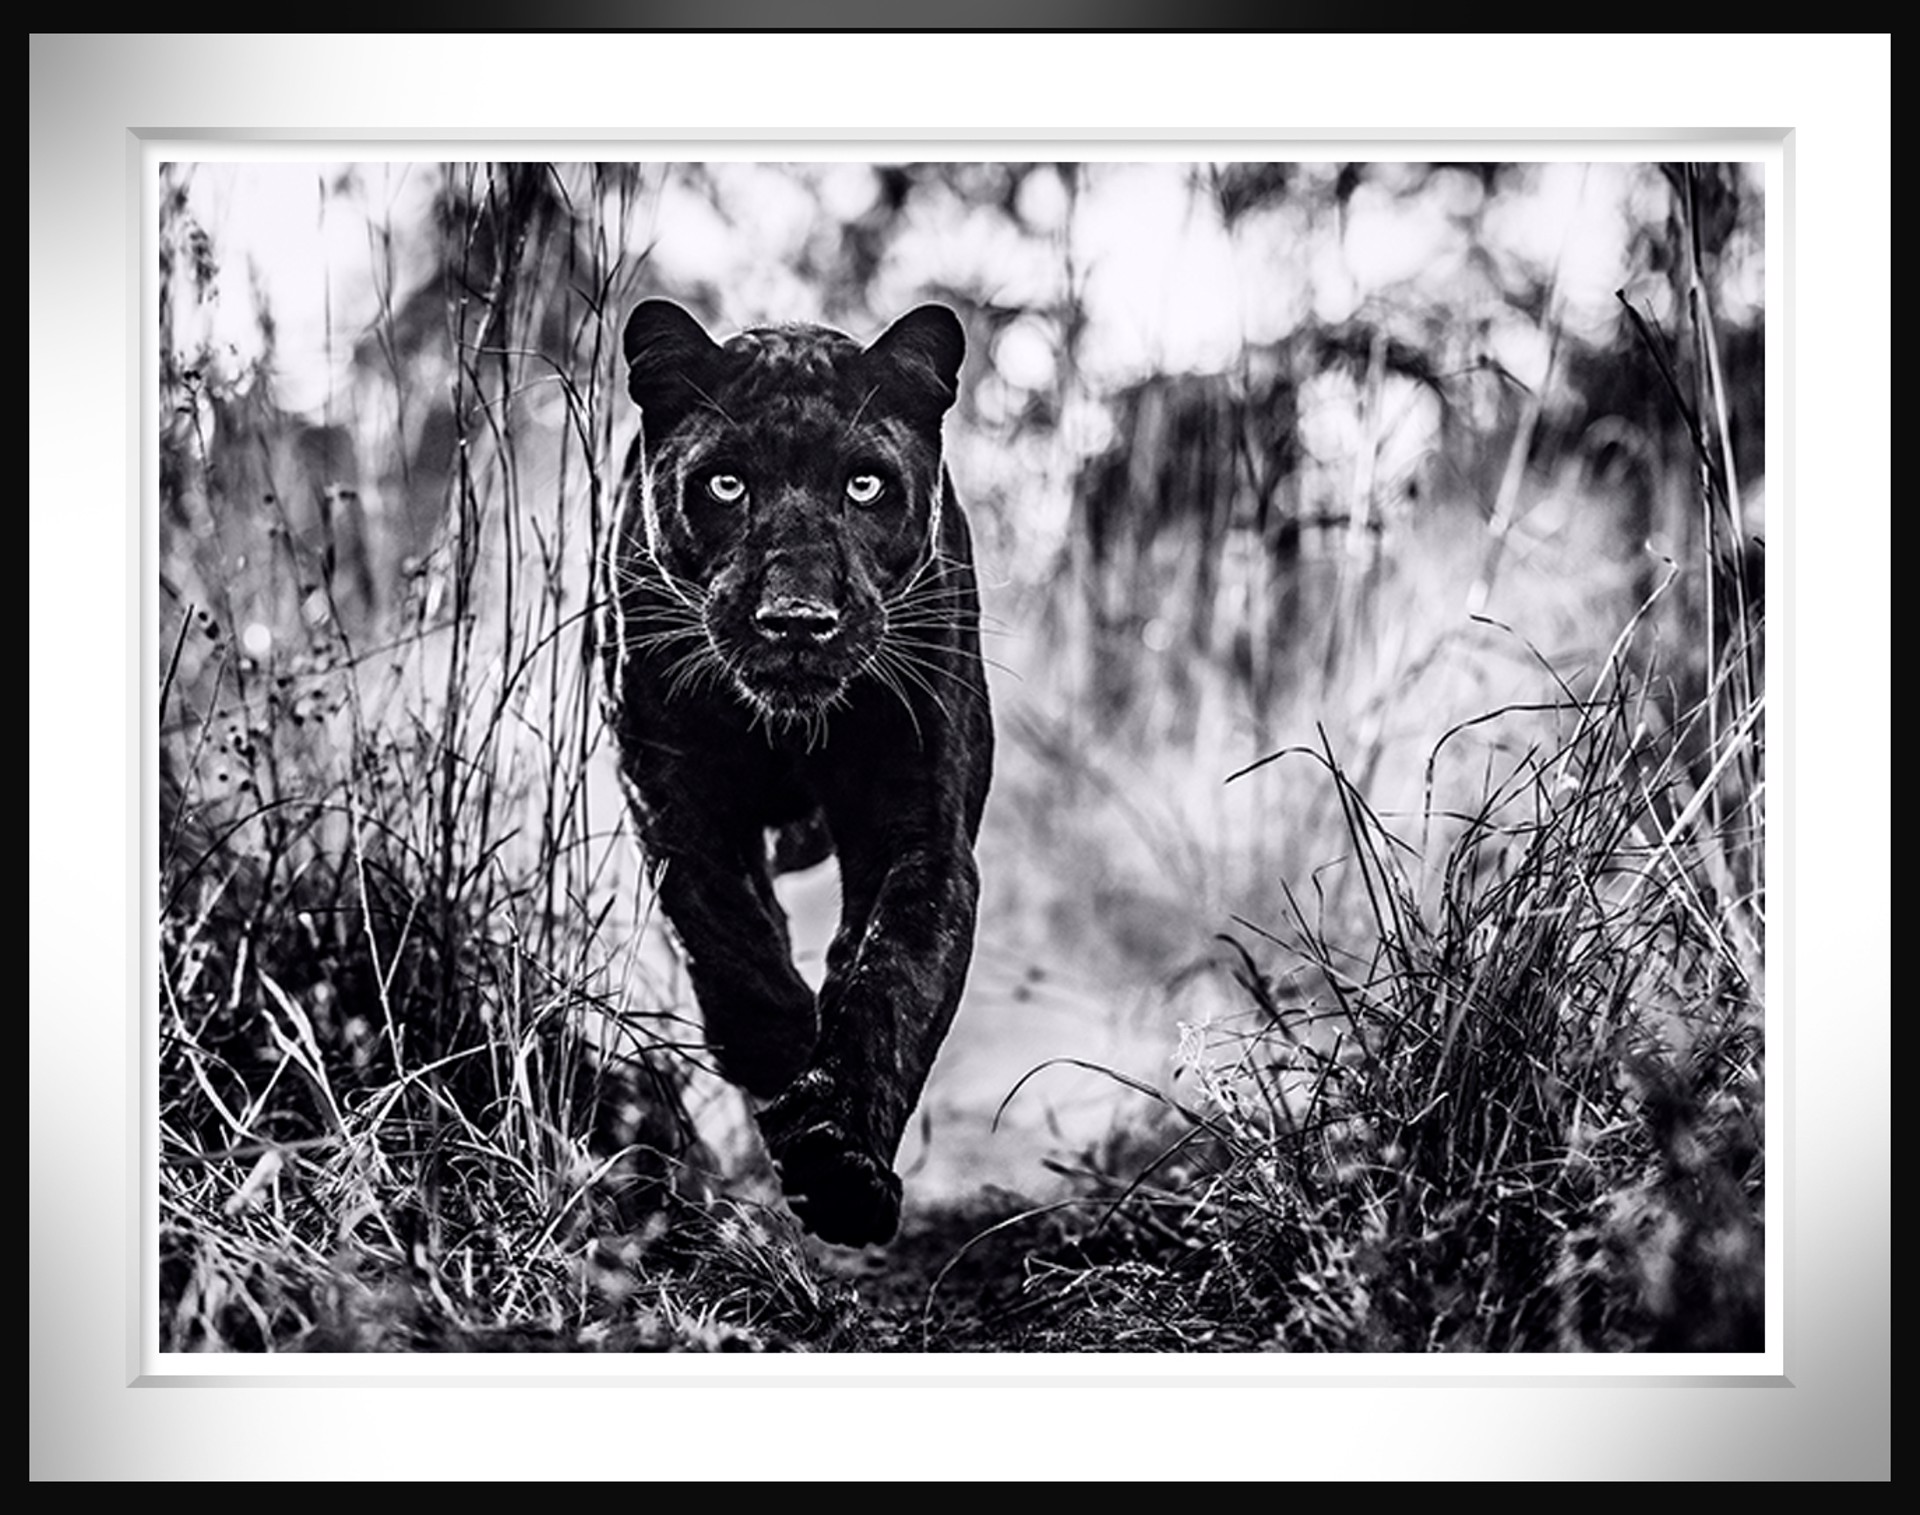 The Black Panther Returns by David Yarrow